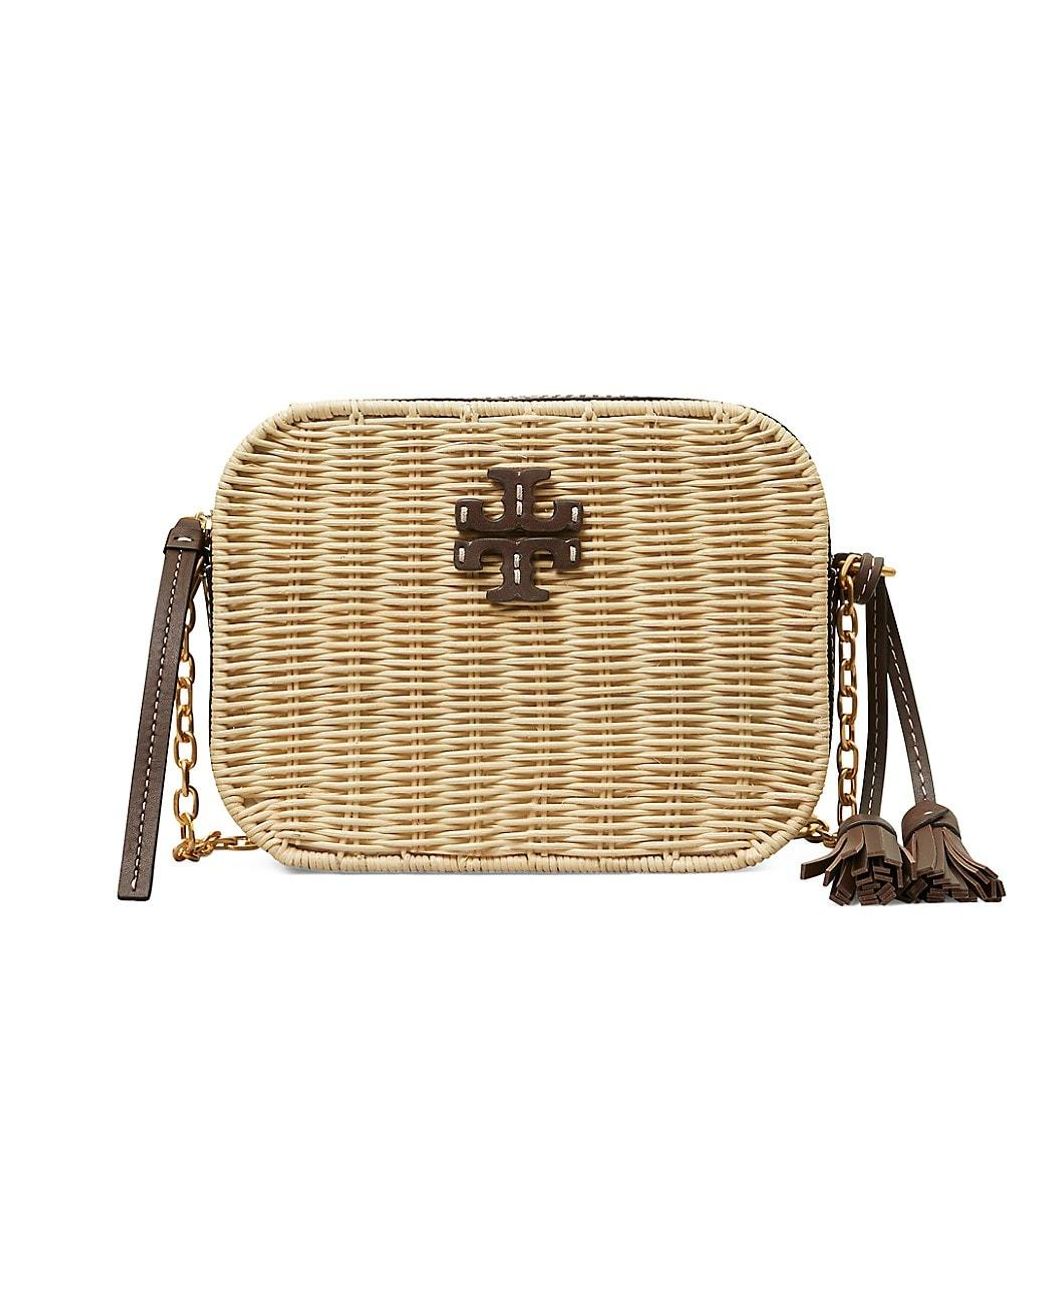 Tory Burch Mcgraw Leather & Rattan Camera Bag in Natural - Lyst